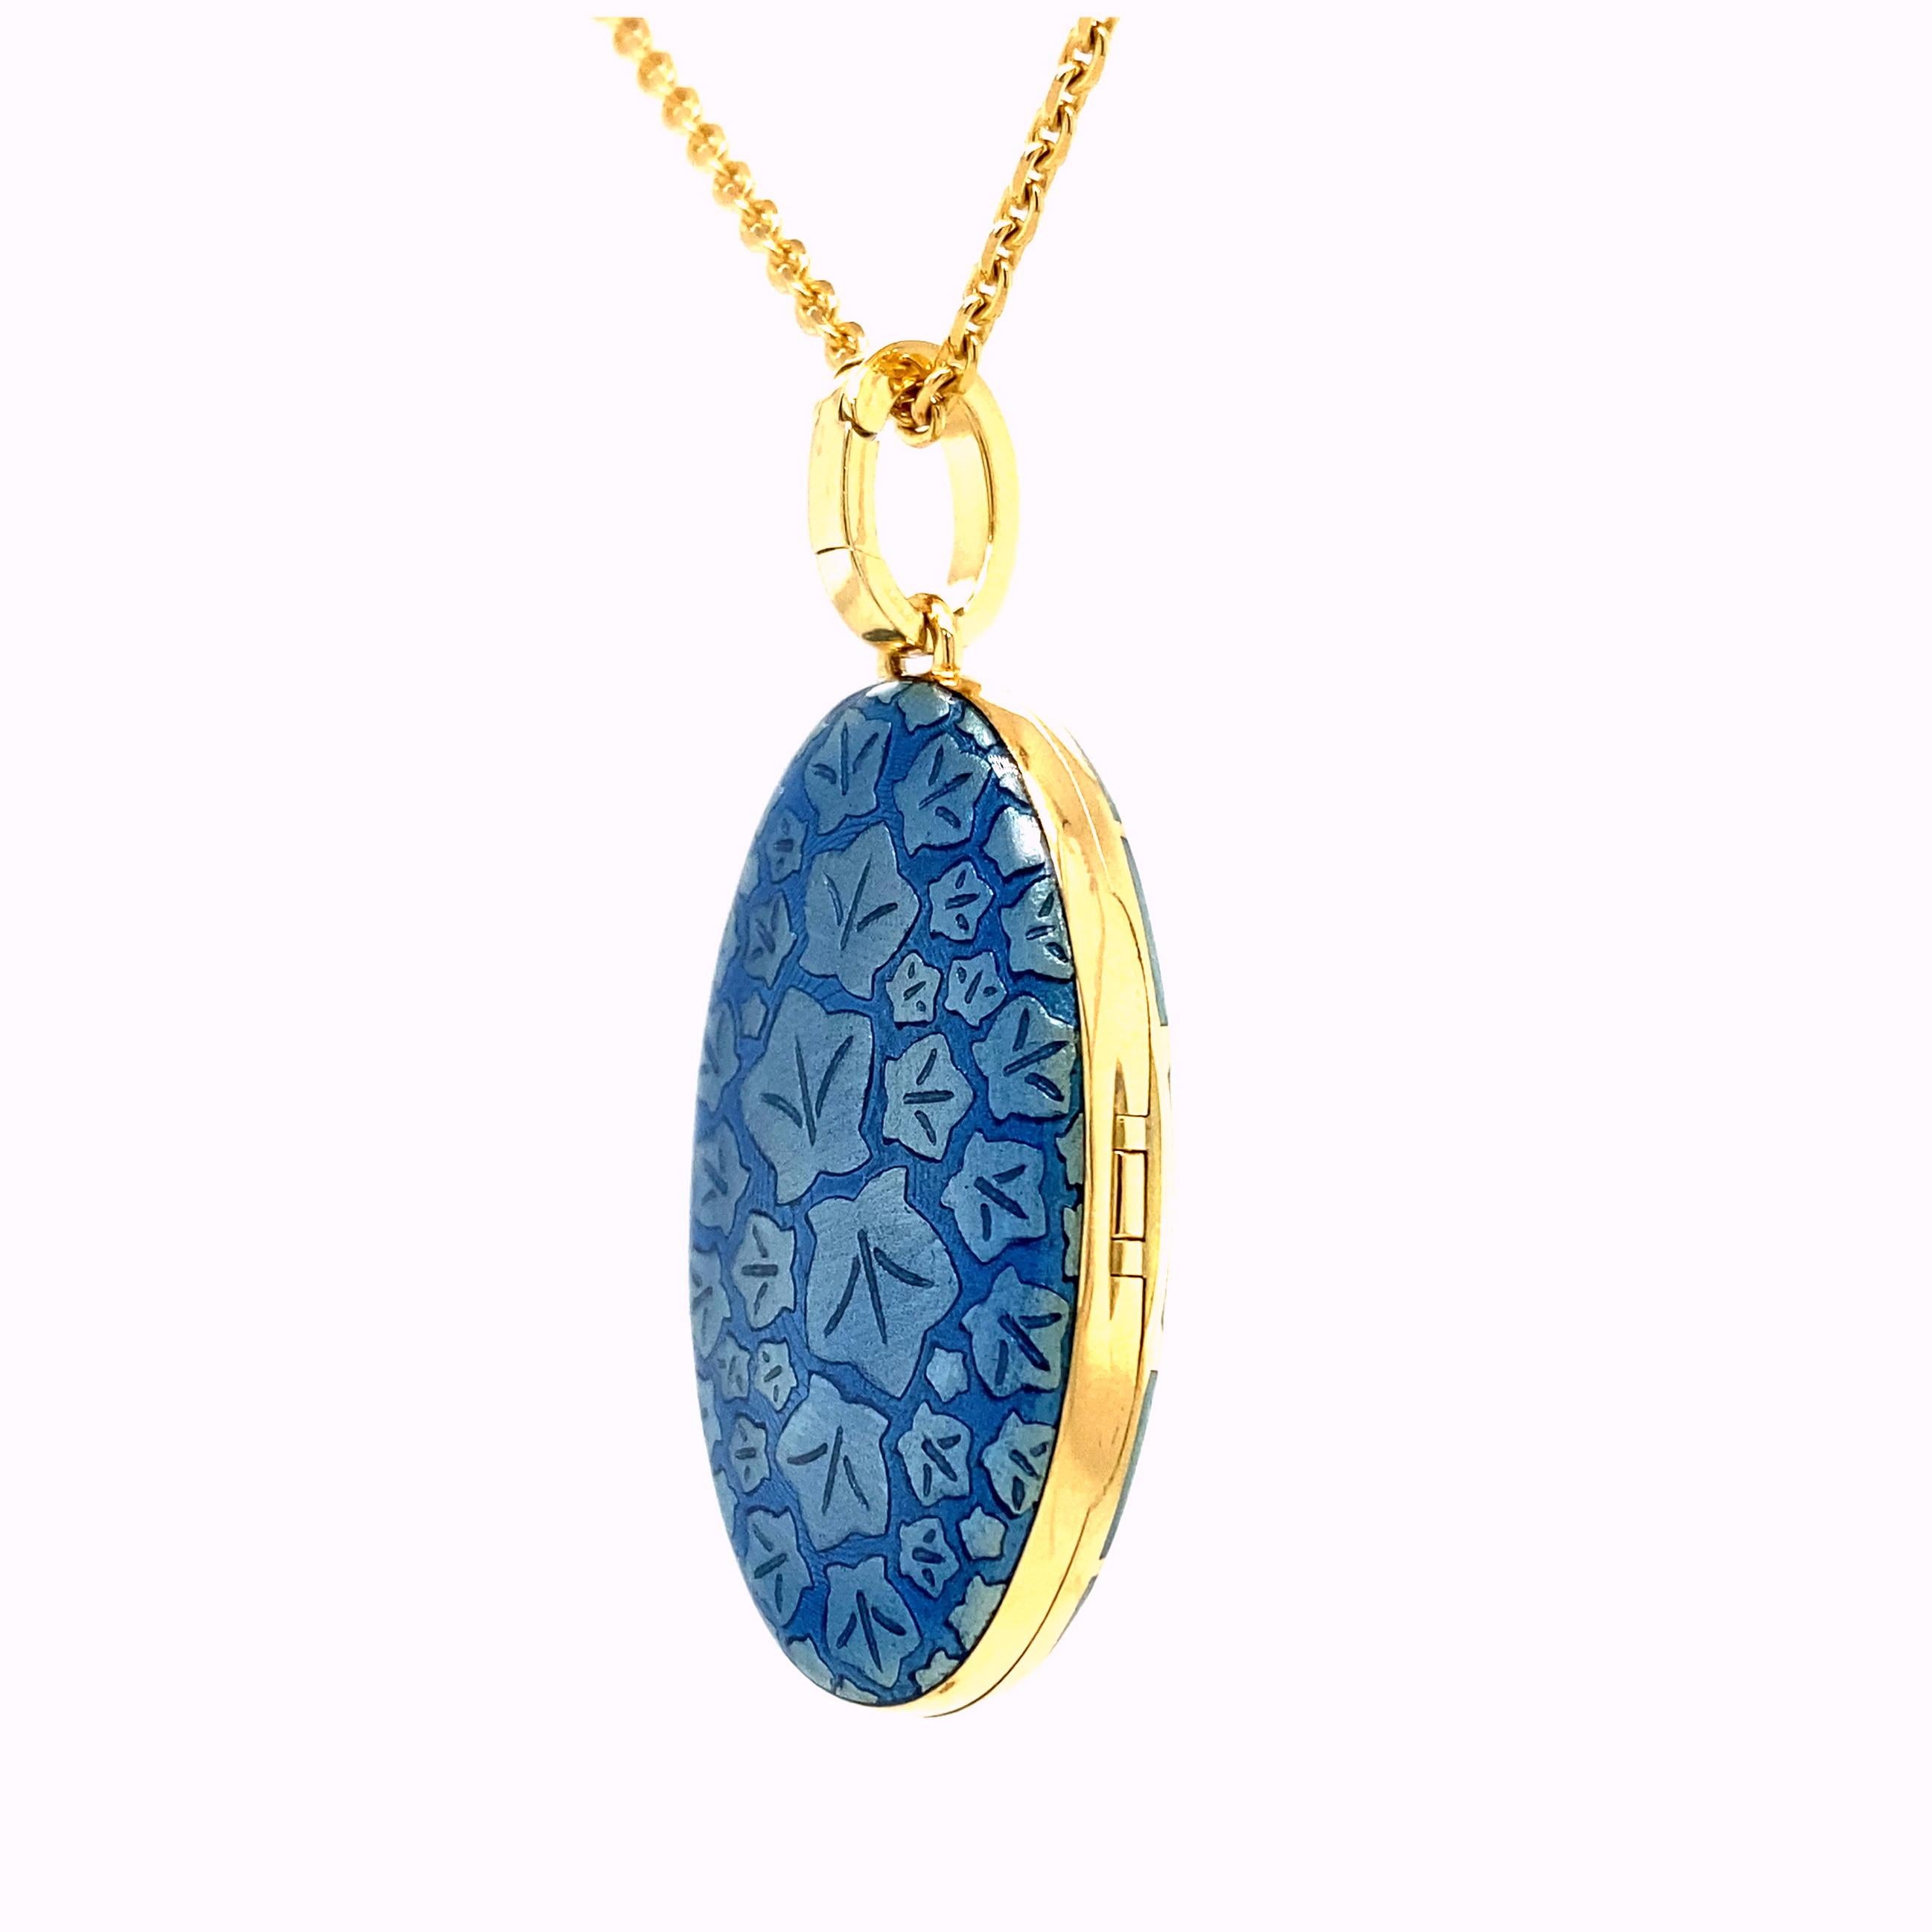 Oval Locket Pendant Necklace 18k Yellow Gold Blue/Turqouise Enamel Diamond 0.1ct In New Condition For Sale In Pforzheim, DE